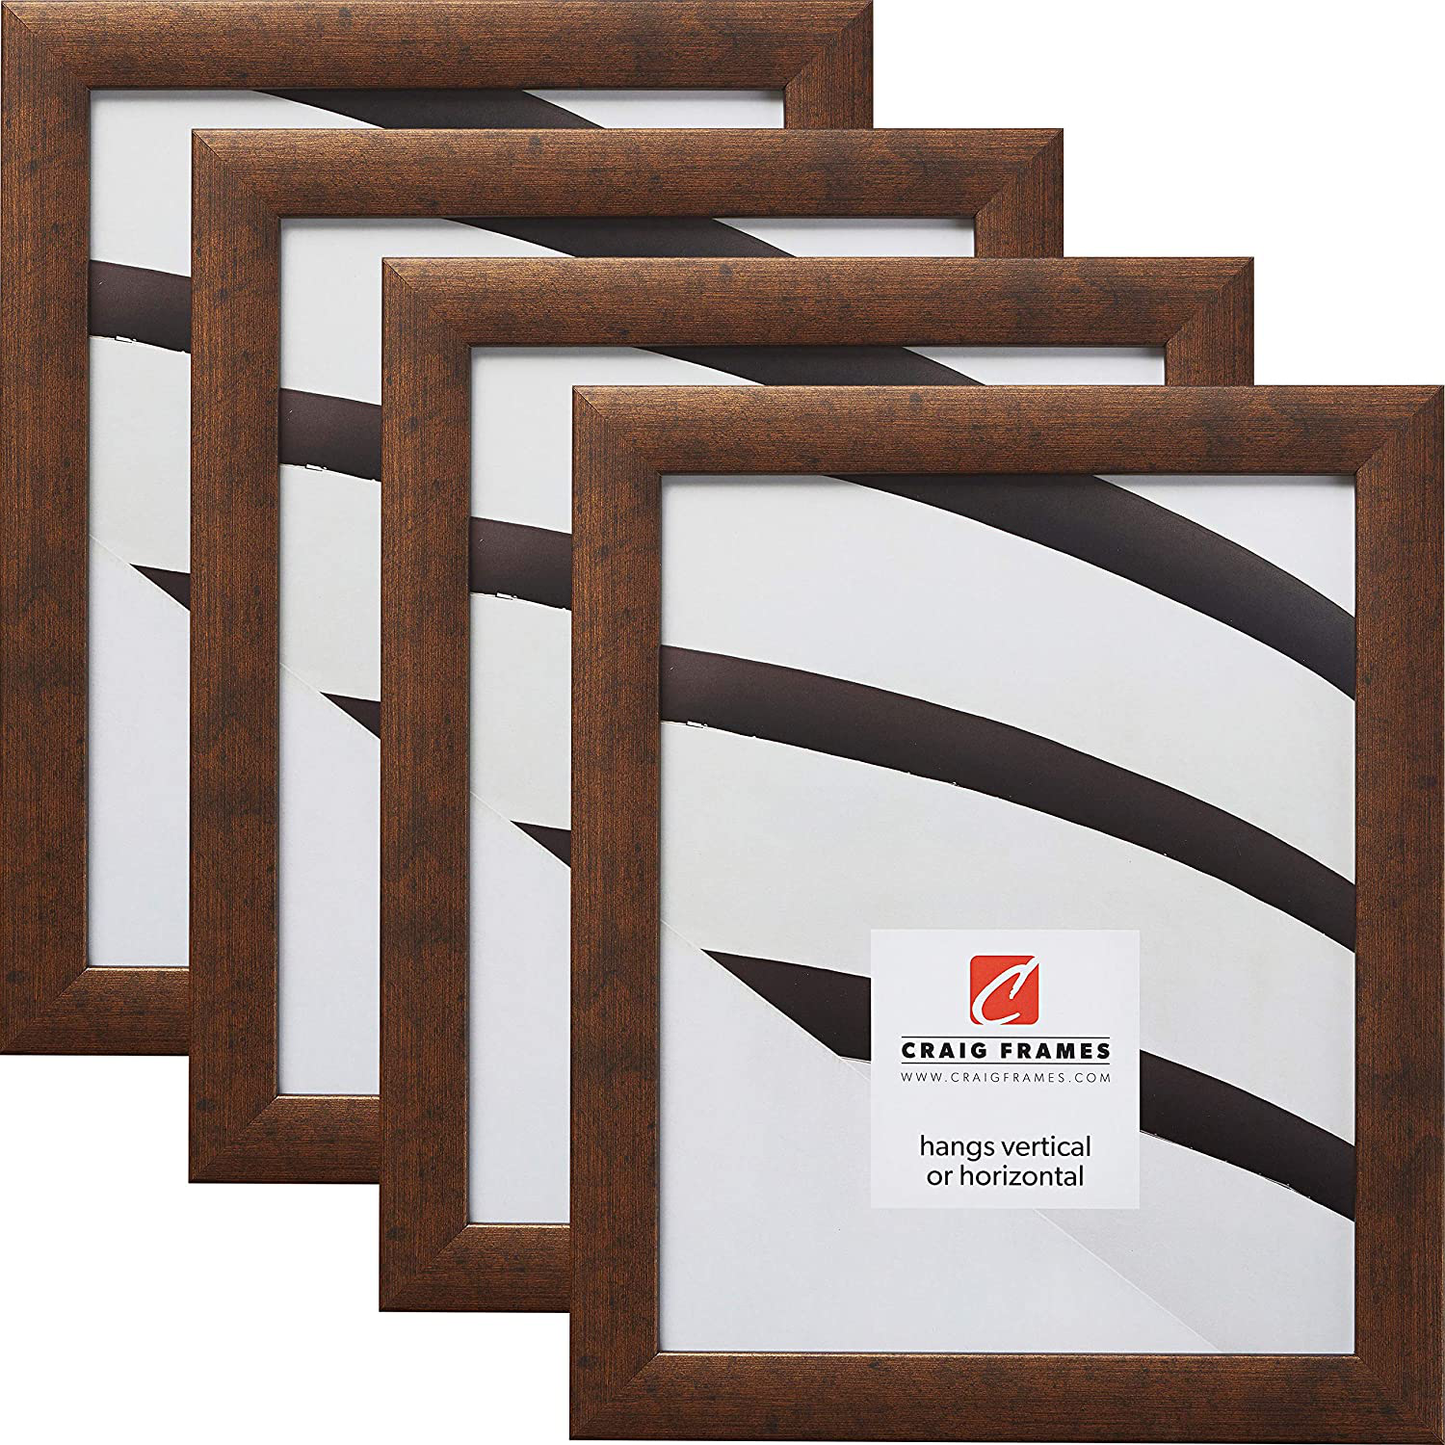 Craig Frames 23247881 4 x 10 Inch Picture Frame, Rustic Copper, Set of 4